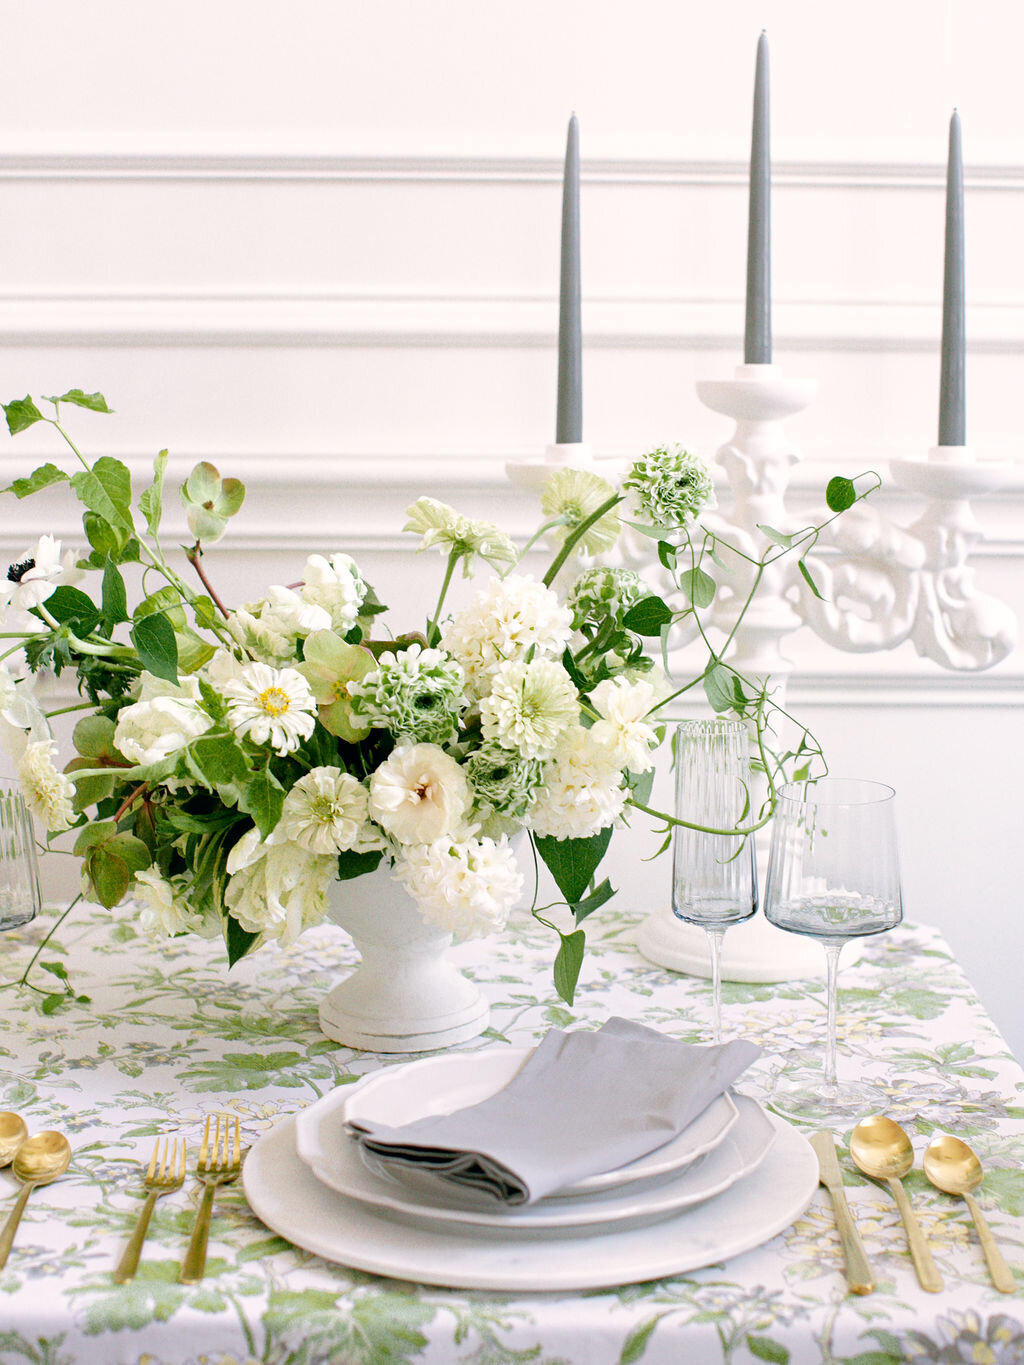 max-owens-design-english-floral-wedding-19-white-place-setting